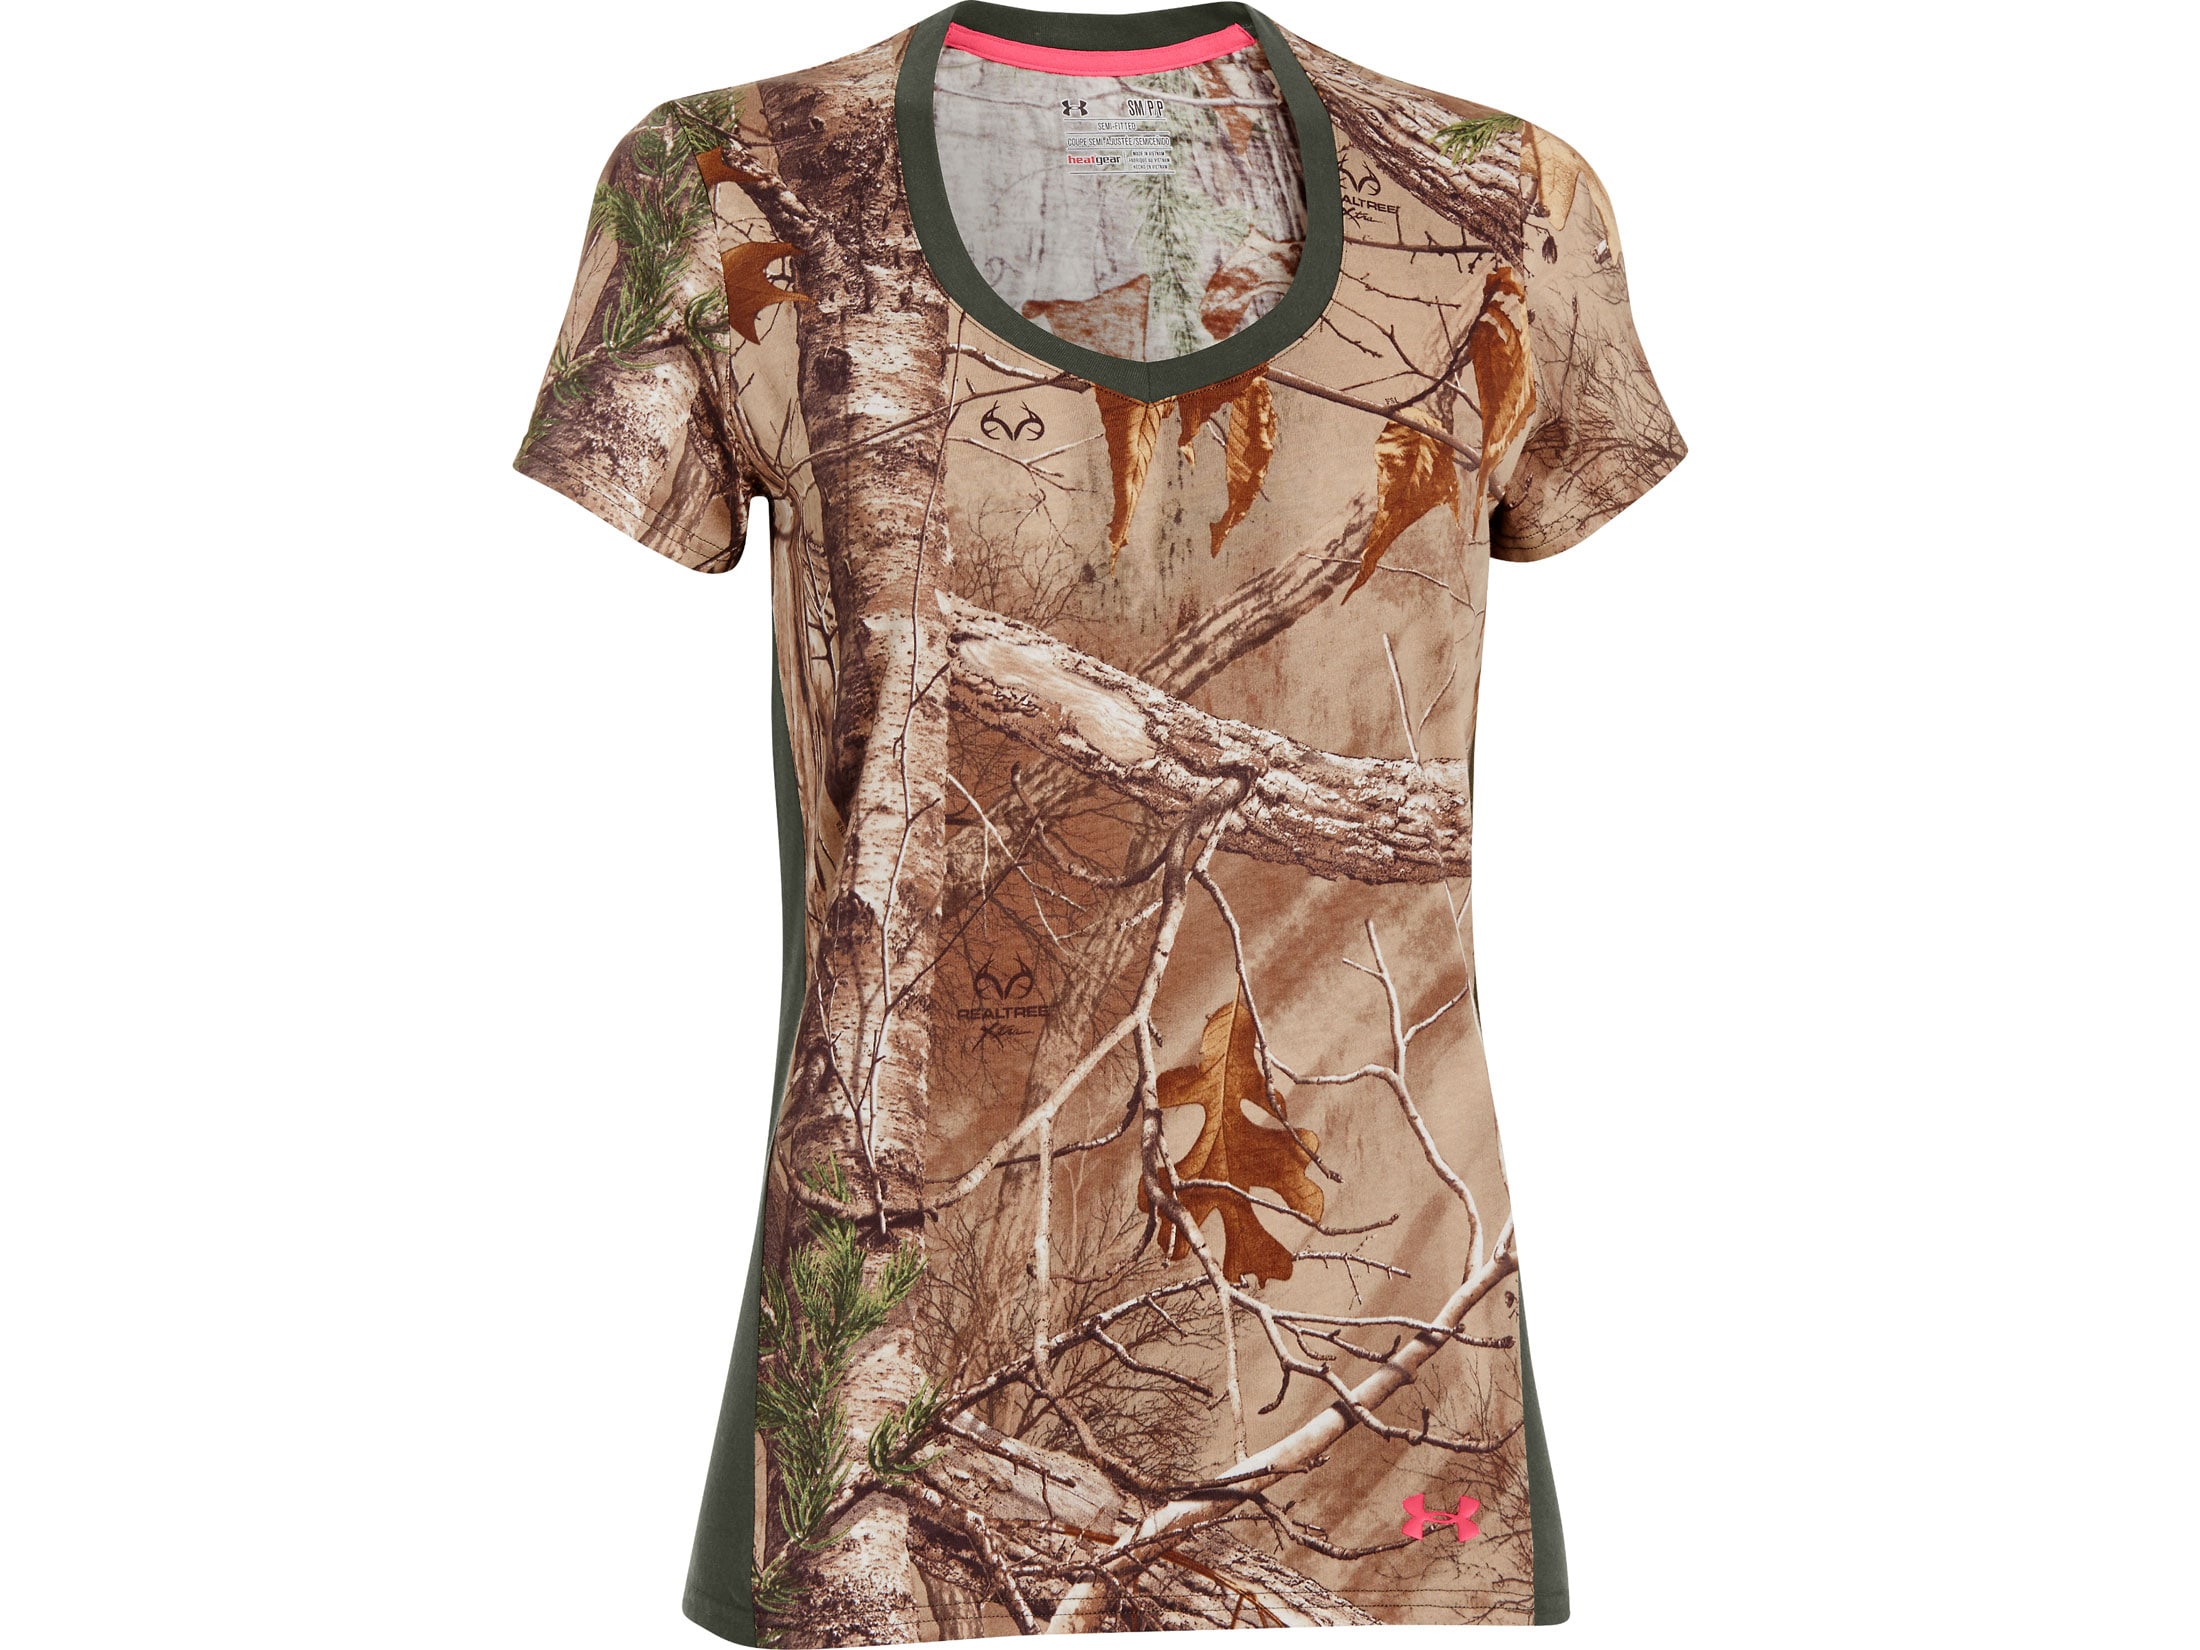 Under Armour Women's Charged Cotton Camo T-Shirt Short Sleeve Cotton